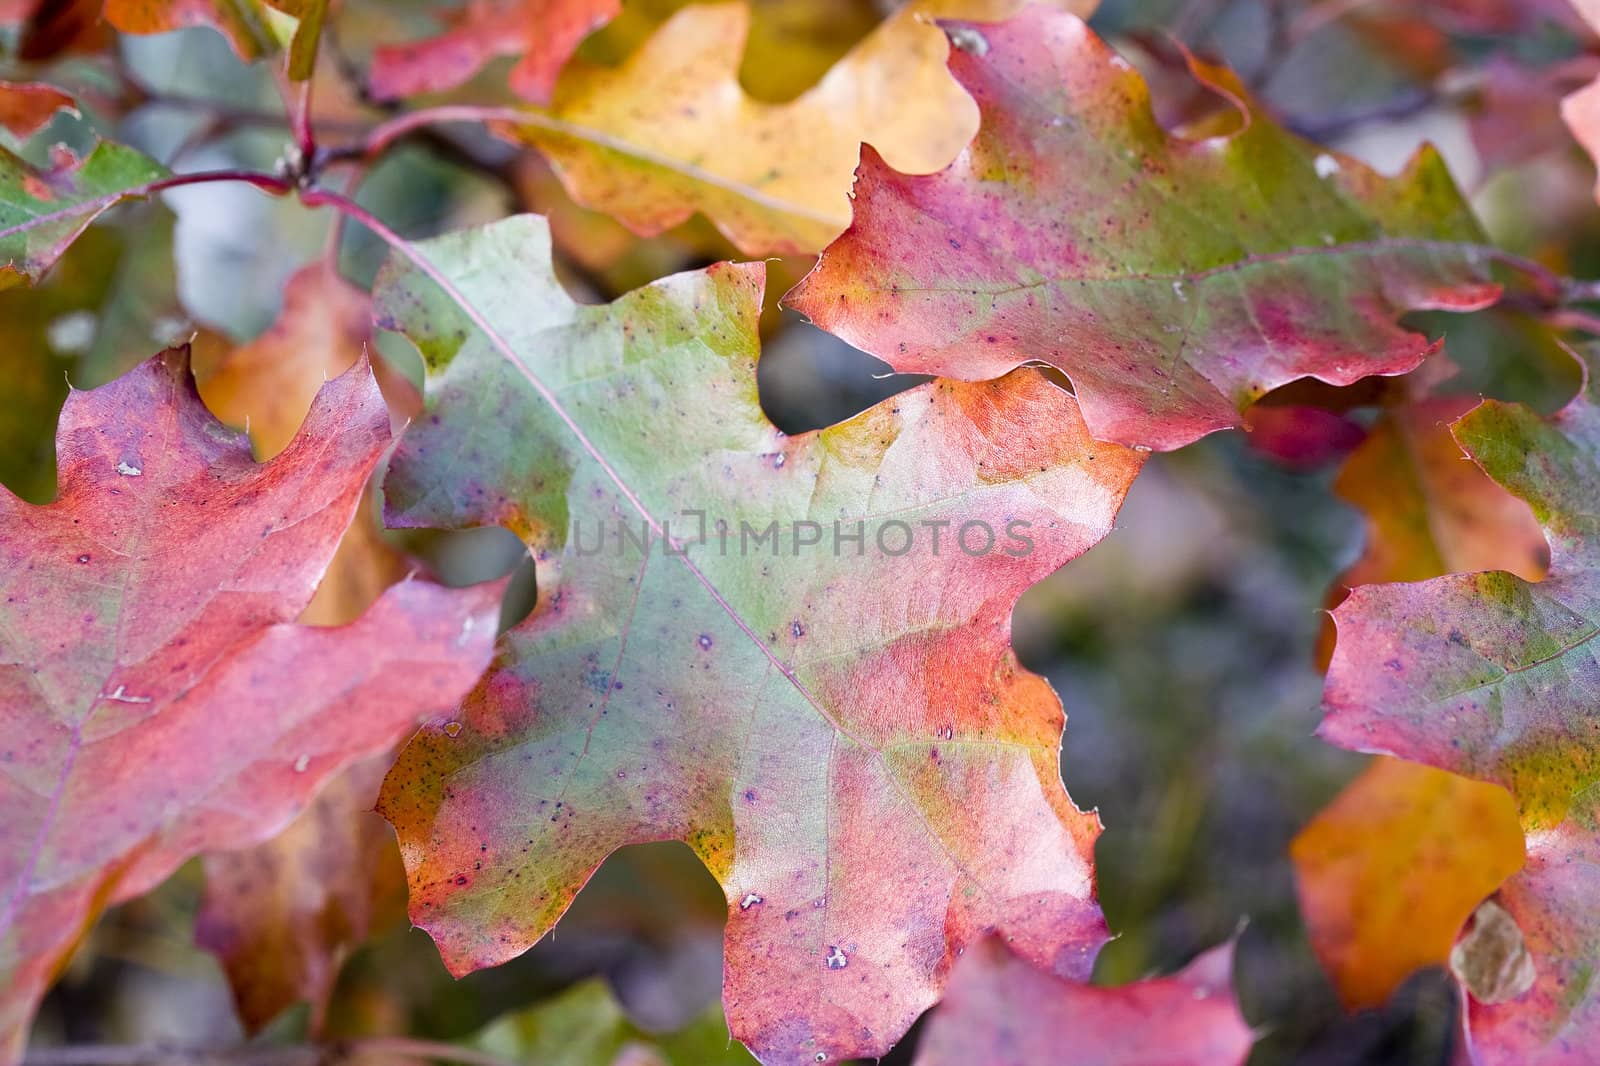 Oak leaves changing colors for the autumn season